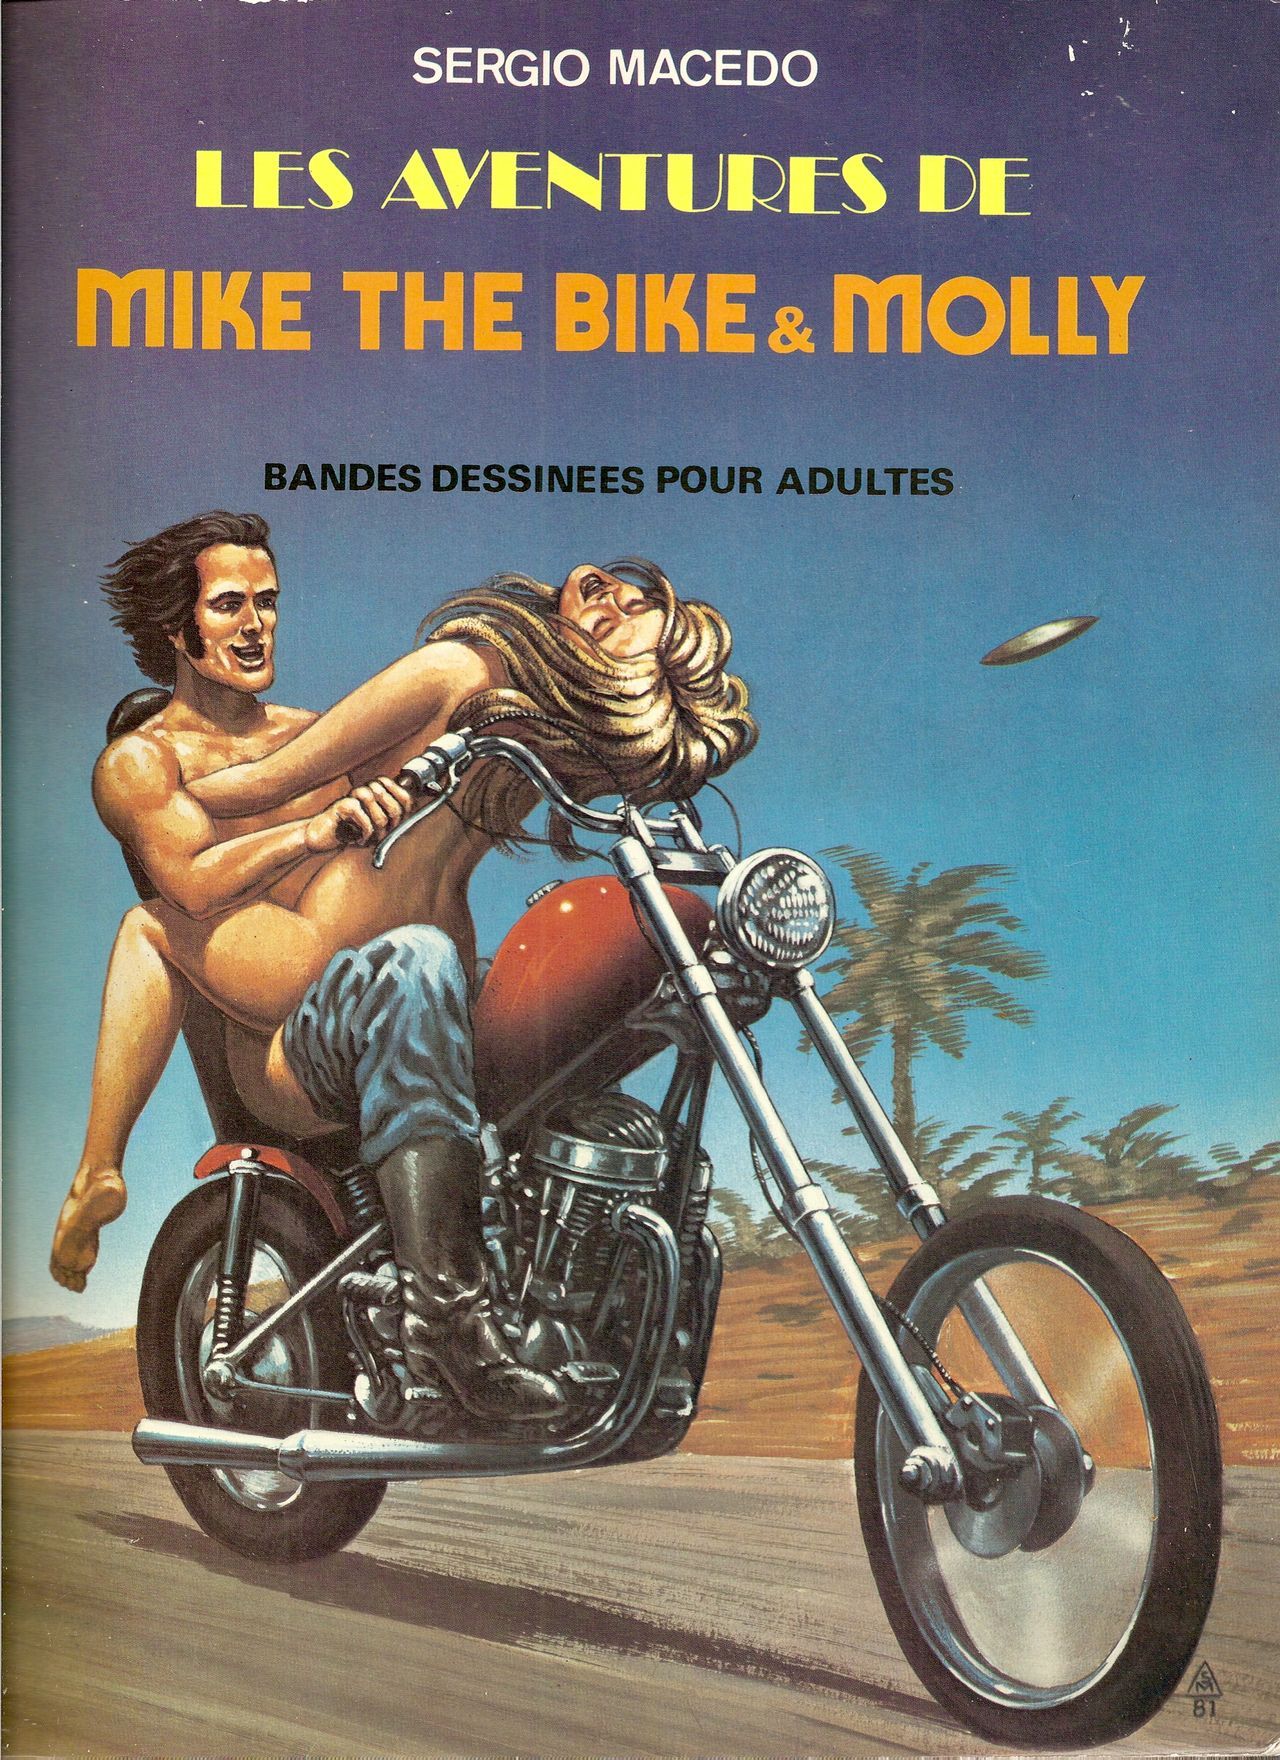 [Macedo] Mike the Bike & Molly (les aventures de)[French] 1